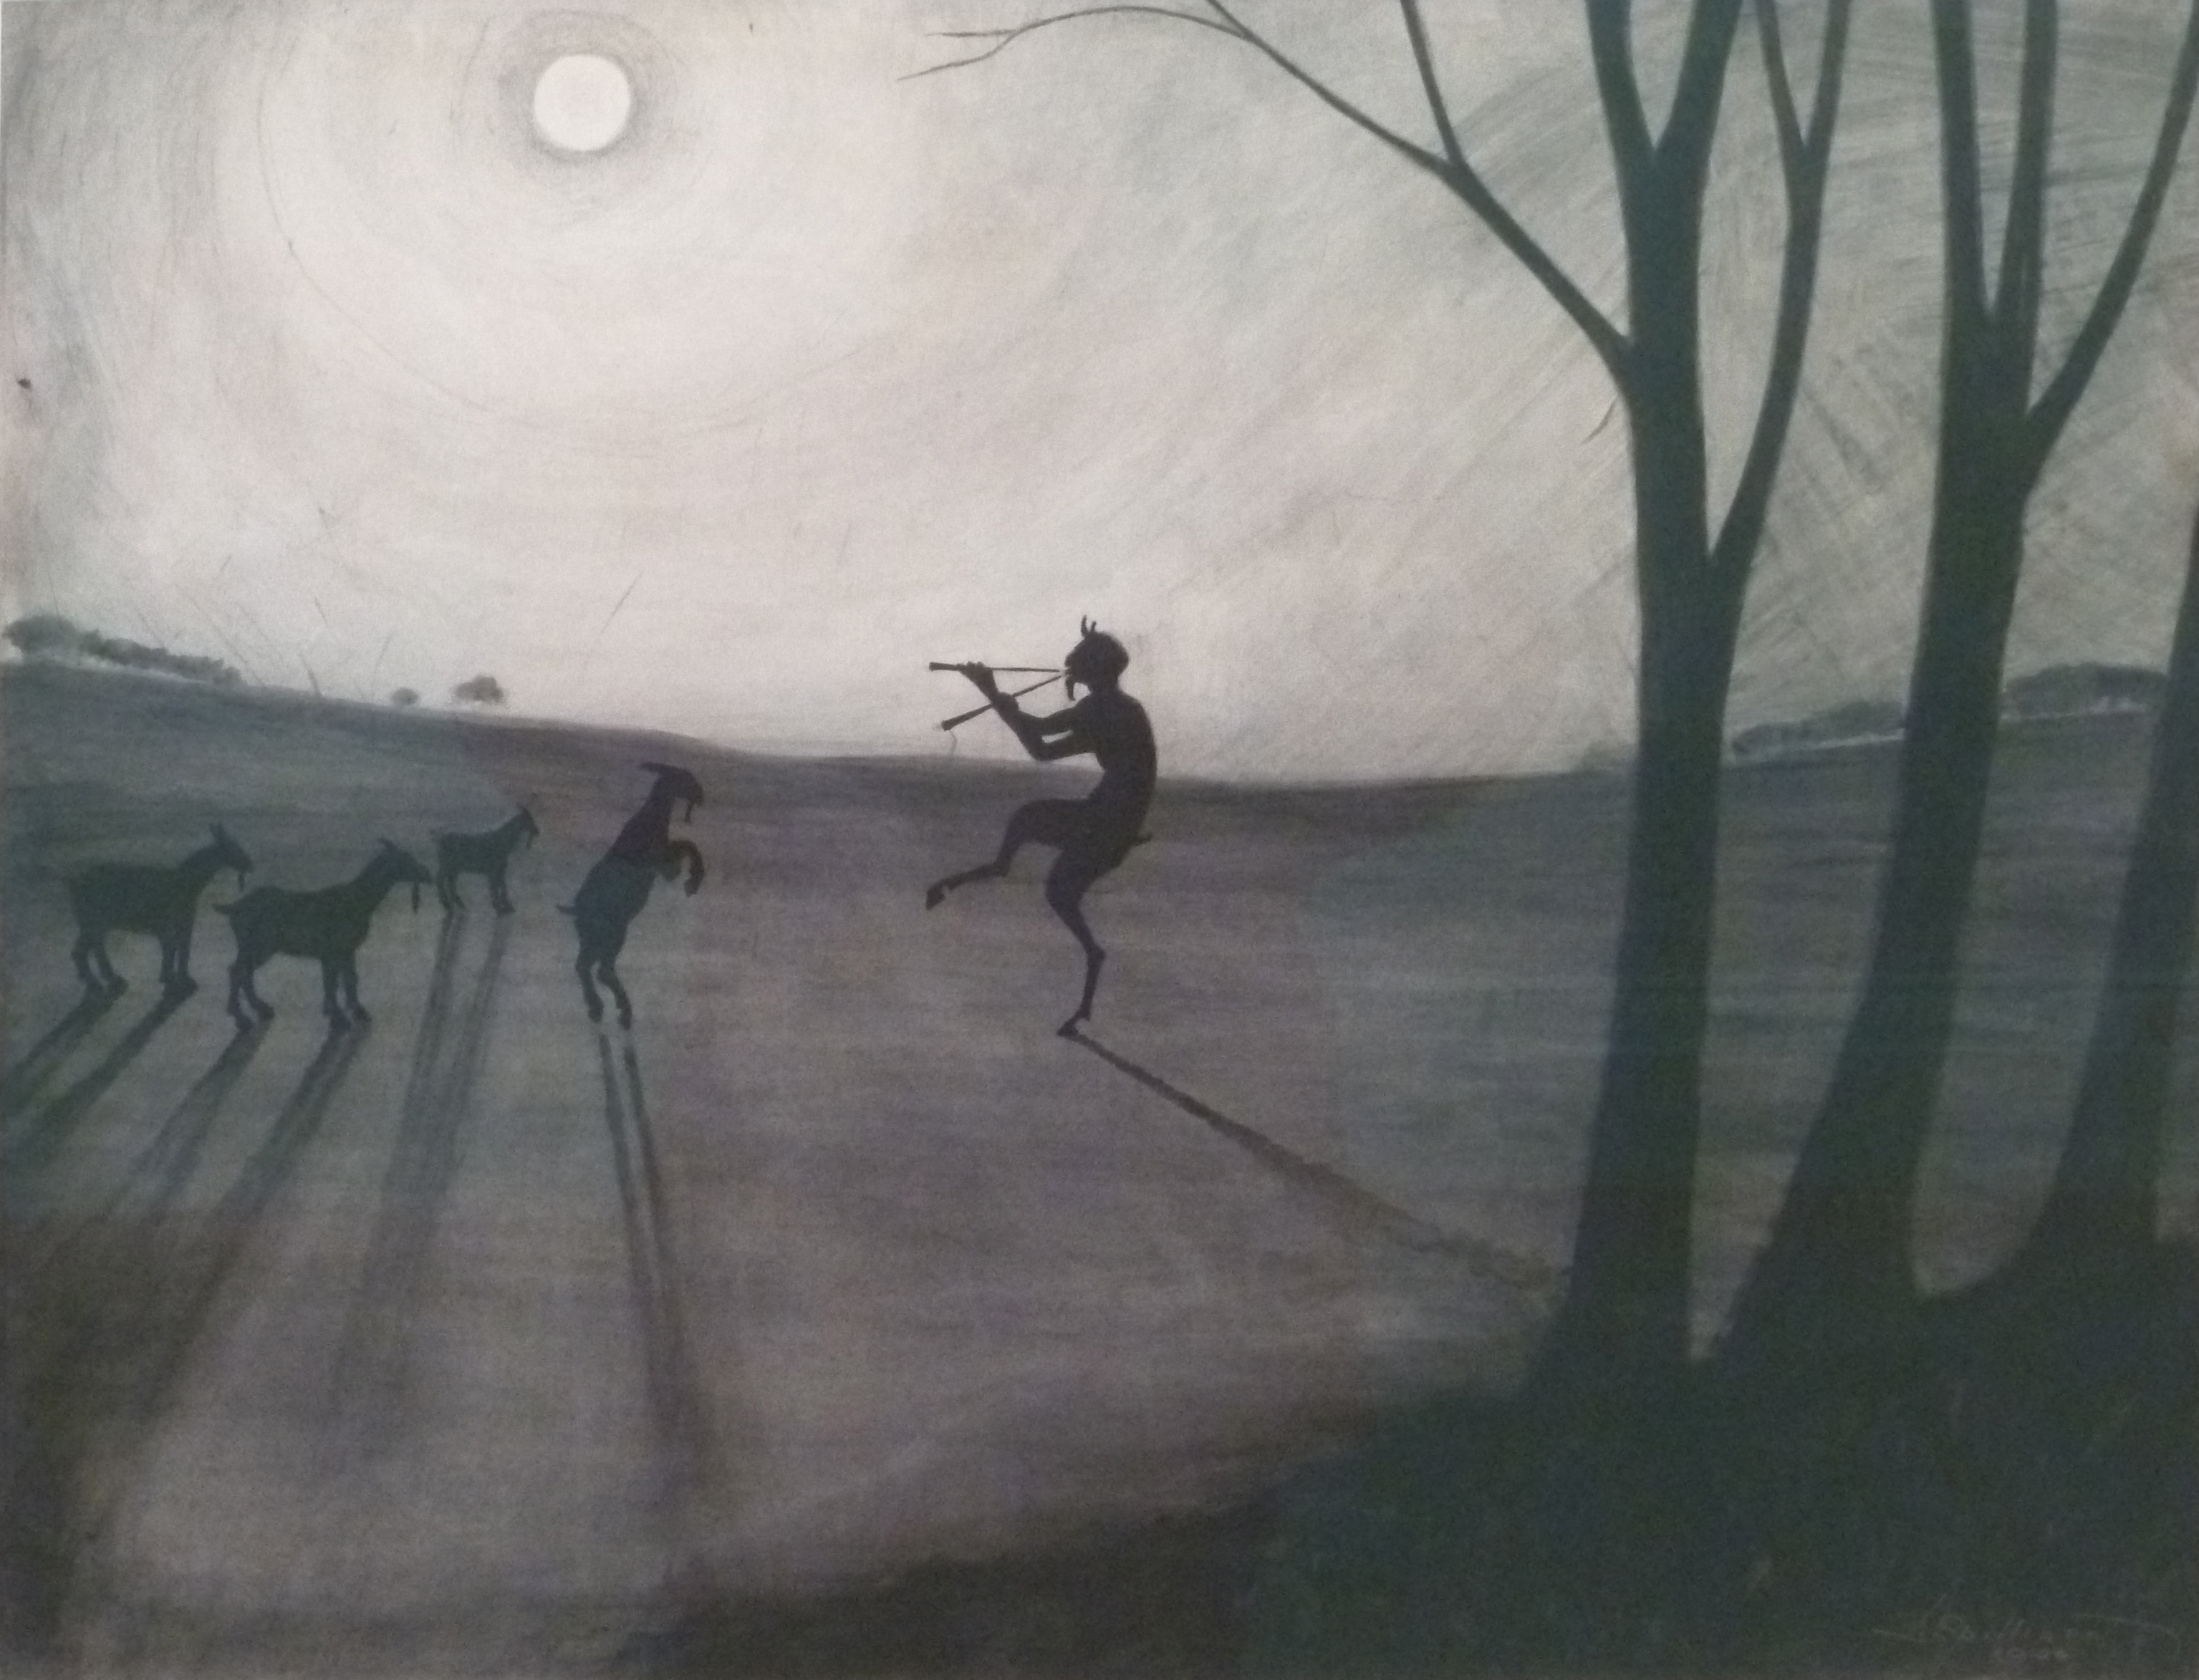 Faun by Moonlight by Léon Spilliaert - 1900 - 49 x 63 cm private collection